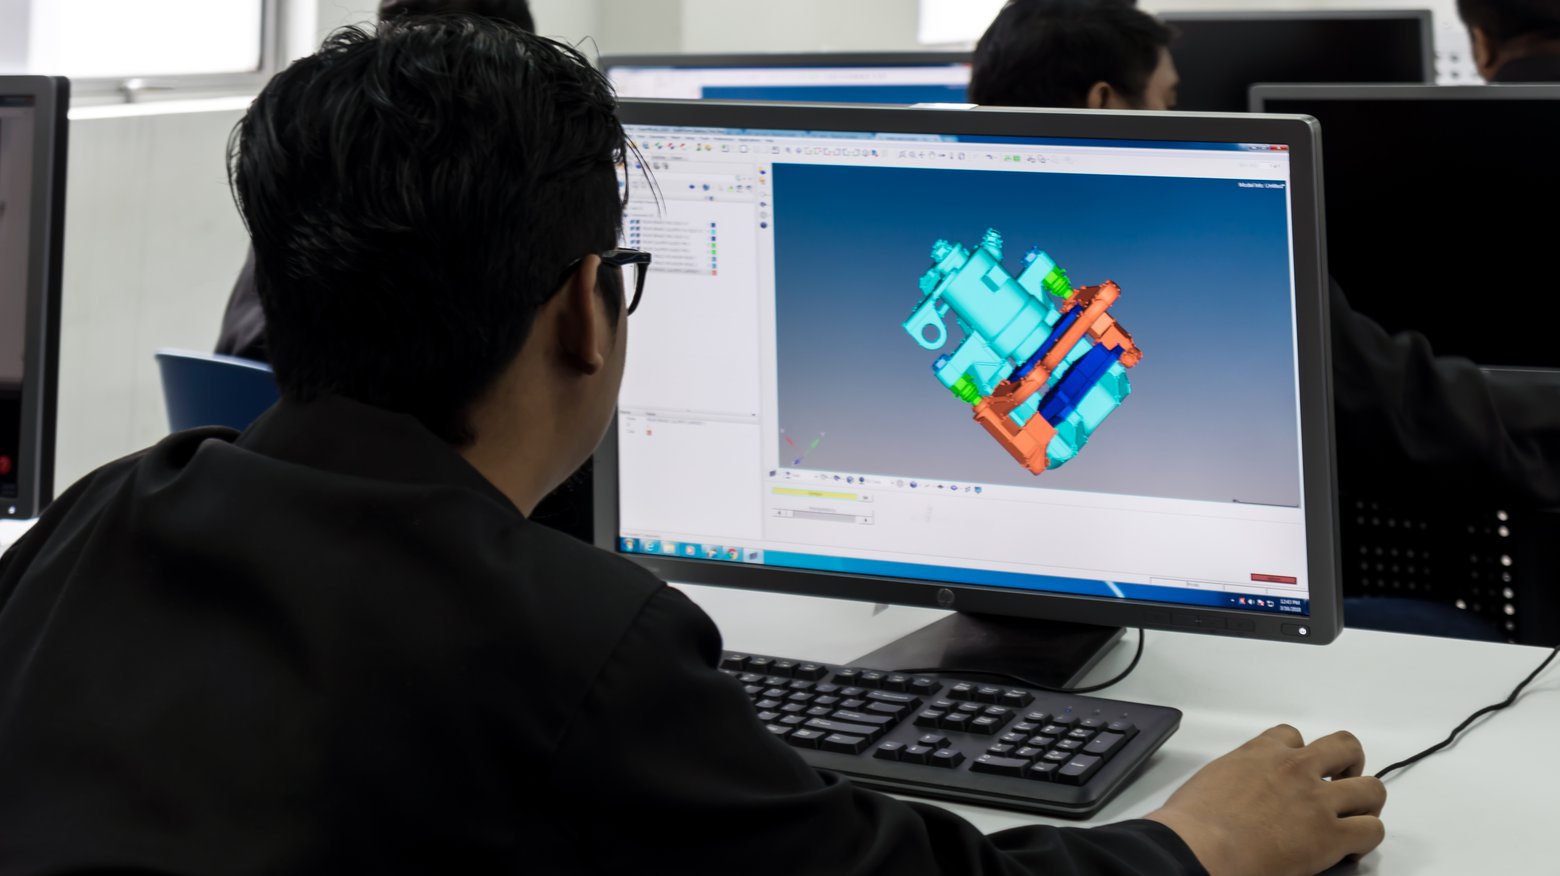 stock-photo-selangor-malaysia-march-a-college-students-are-designing-and-doing-analysis-in-cad-software-1062919226.jpg